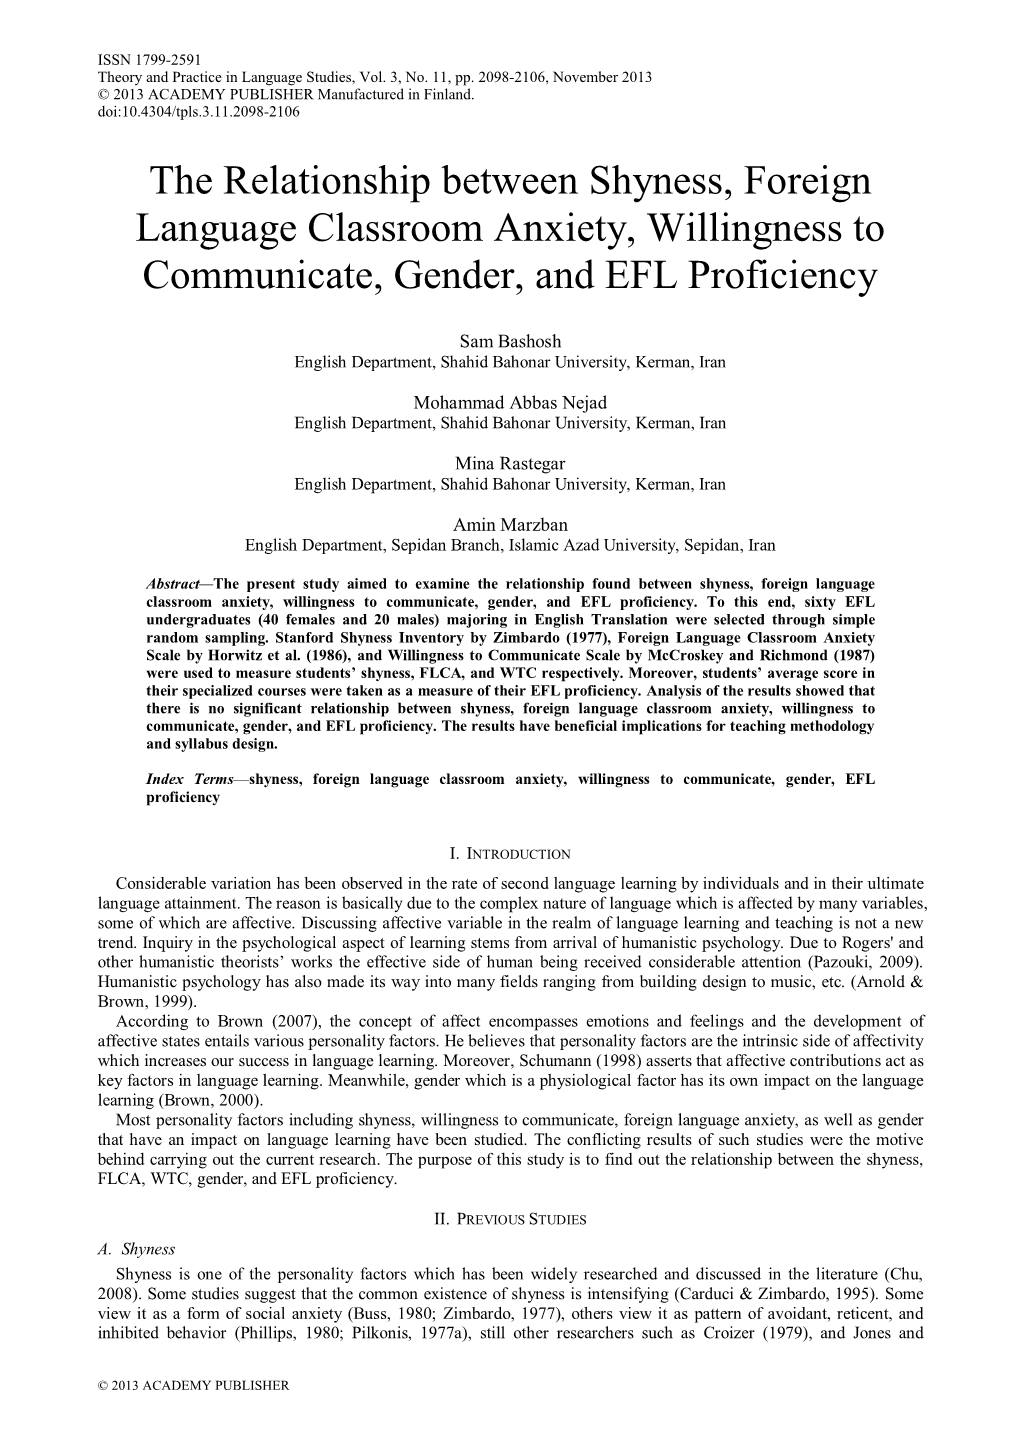 The Relationship Between Shyness, Foreign Language Classroom Anxiety, Willingness to Communicate, Gender, and EFL Proficiency